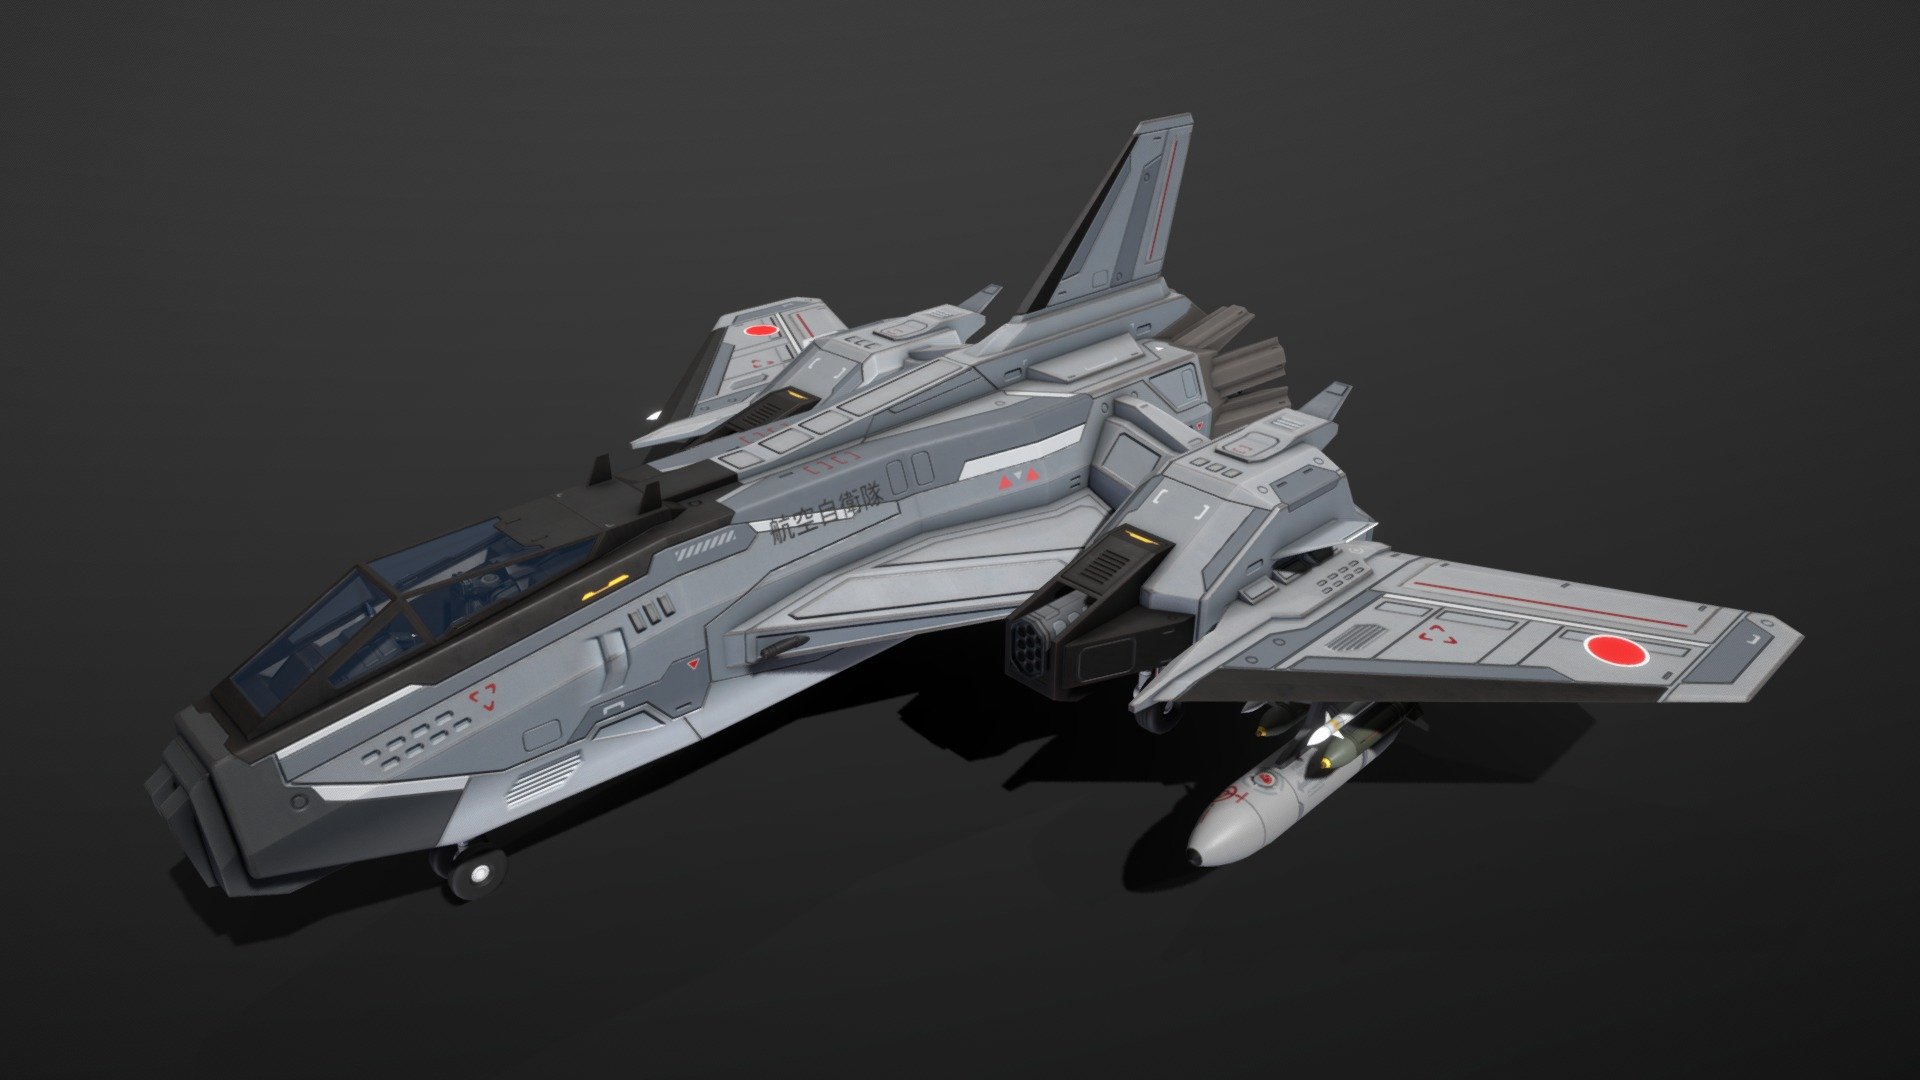 This is a model of a low-poly and game-ready scifi fighter. 

Equipment: 4 missiles, 2 bombs, fuel tank, 3 barrels, minigun, railgun, missile pod. The weapons are separate meshes and can be attached to the fighter.

Features: retractable landing gear, optional wheel or skid landing gear, movable aileron, elevator, rudder, modular cockpit parts, 3 pre-assembled cockpits, cockpits can be changed, cockpit canopy can be opened, transparent and opaque cockpit canopy, 33 decals: national enblems and labels

The model comes with several differently colored texture sets. The PSD file with intact layers is included.

Please note: The textures in the Sketchfab viewer have a reduced resolution to improve Sketchfab loading speed.

If you have bought this model please make sure to download the “additional file”.  It contains FBX and OBJ meshes, full resolution textures and the source PSDs with intact layers. The meshes are separate and can be animated (e.g. firing animations for gun barrels, etc) 3d model